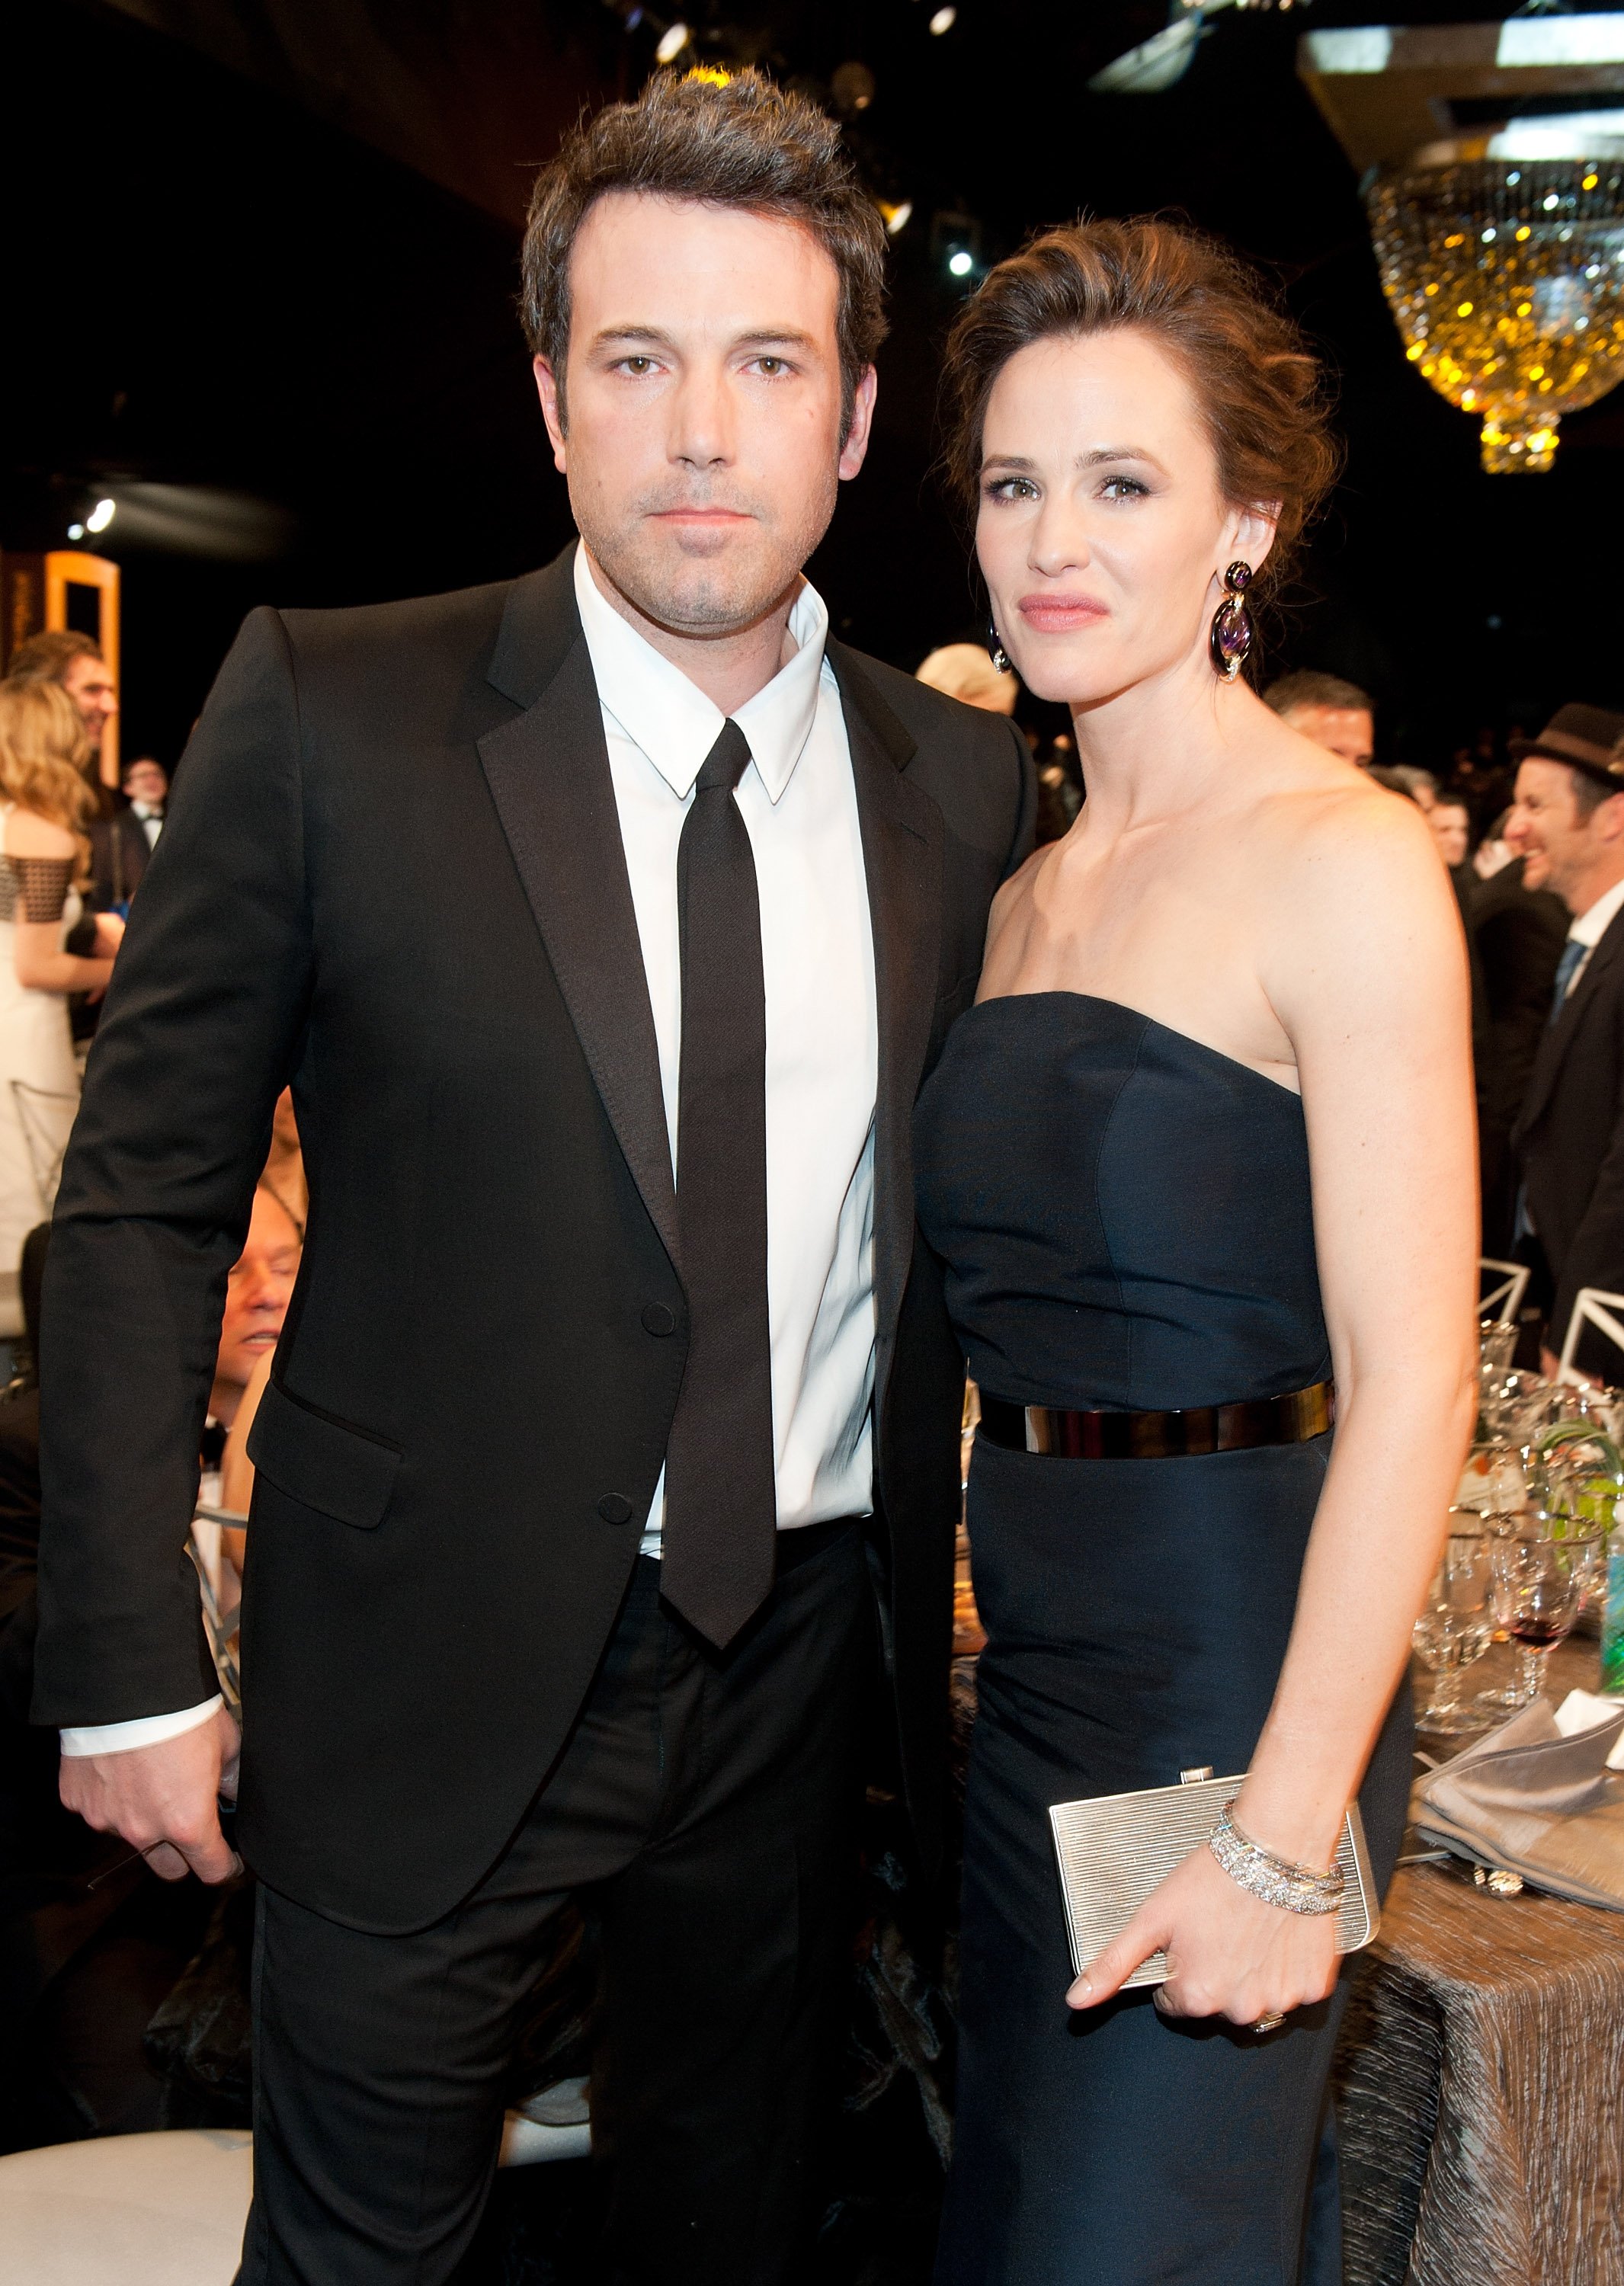  Actors Ben Affleck and Jennifer Garner attend the 20th Annual Screen Actors Guild Awards at The Shrine Auditorium on January 18, 2014 in Los Angeles, California | Source: Getty Images